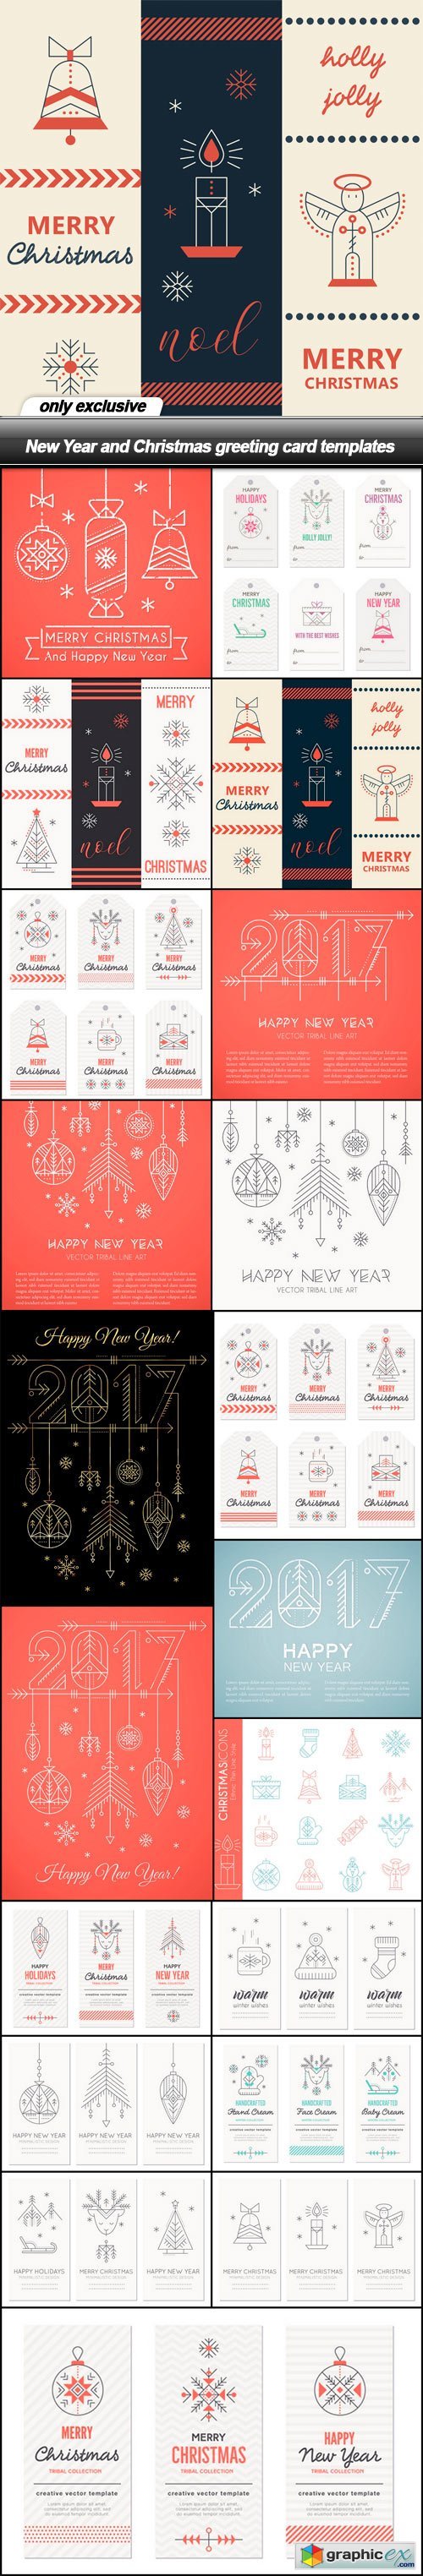 New Year and Christmas greeting card templates - 20 EPS